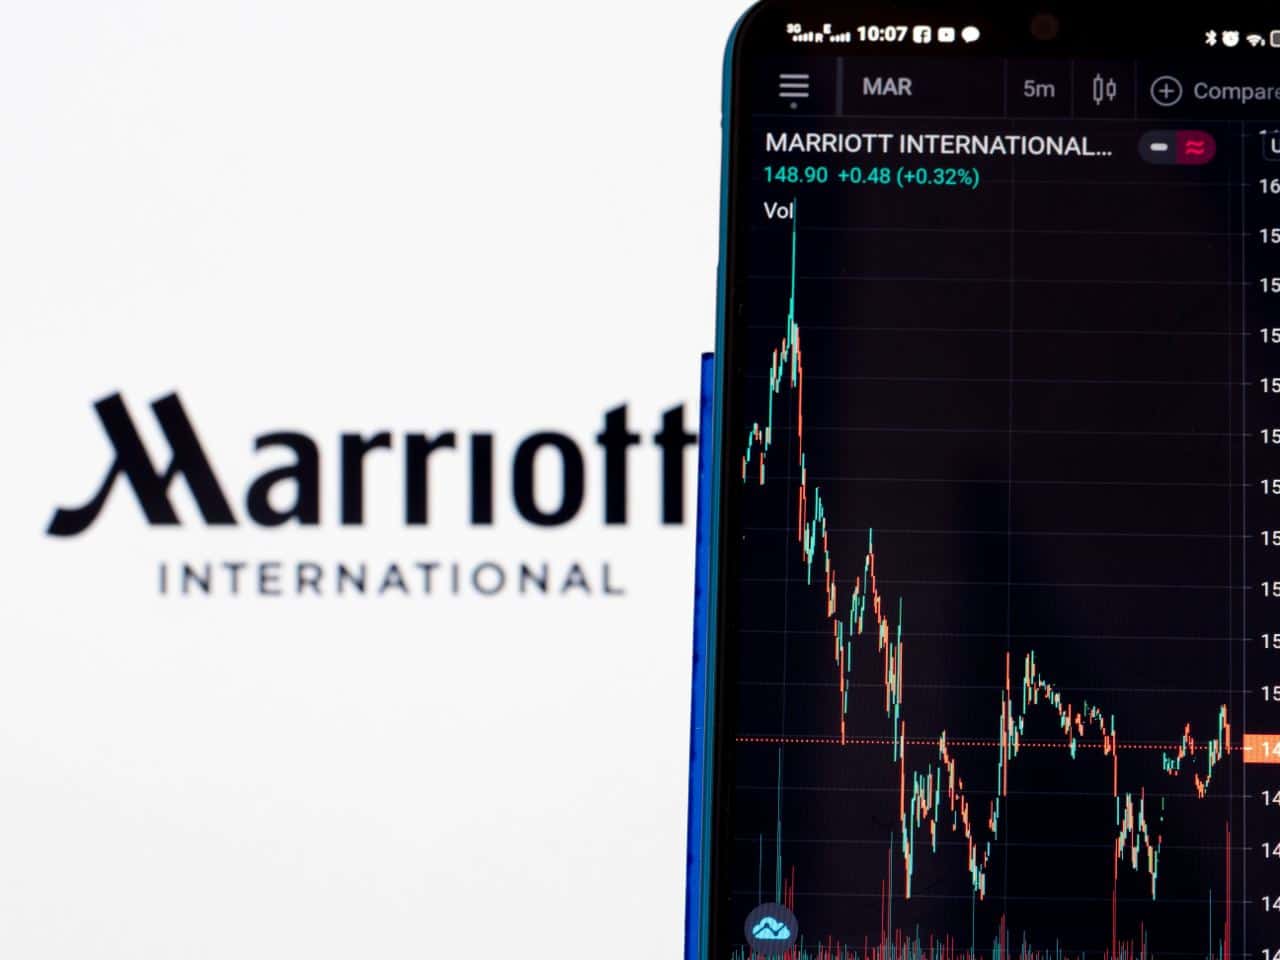 Marriott stock rises after announcing revenue growth and strong